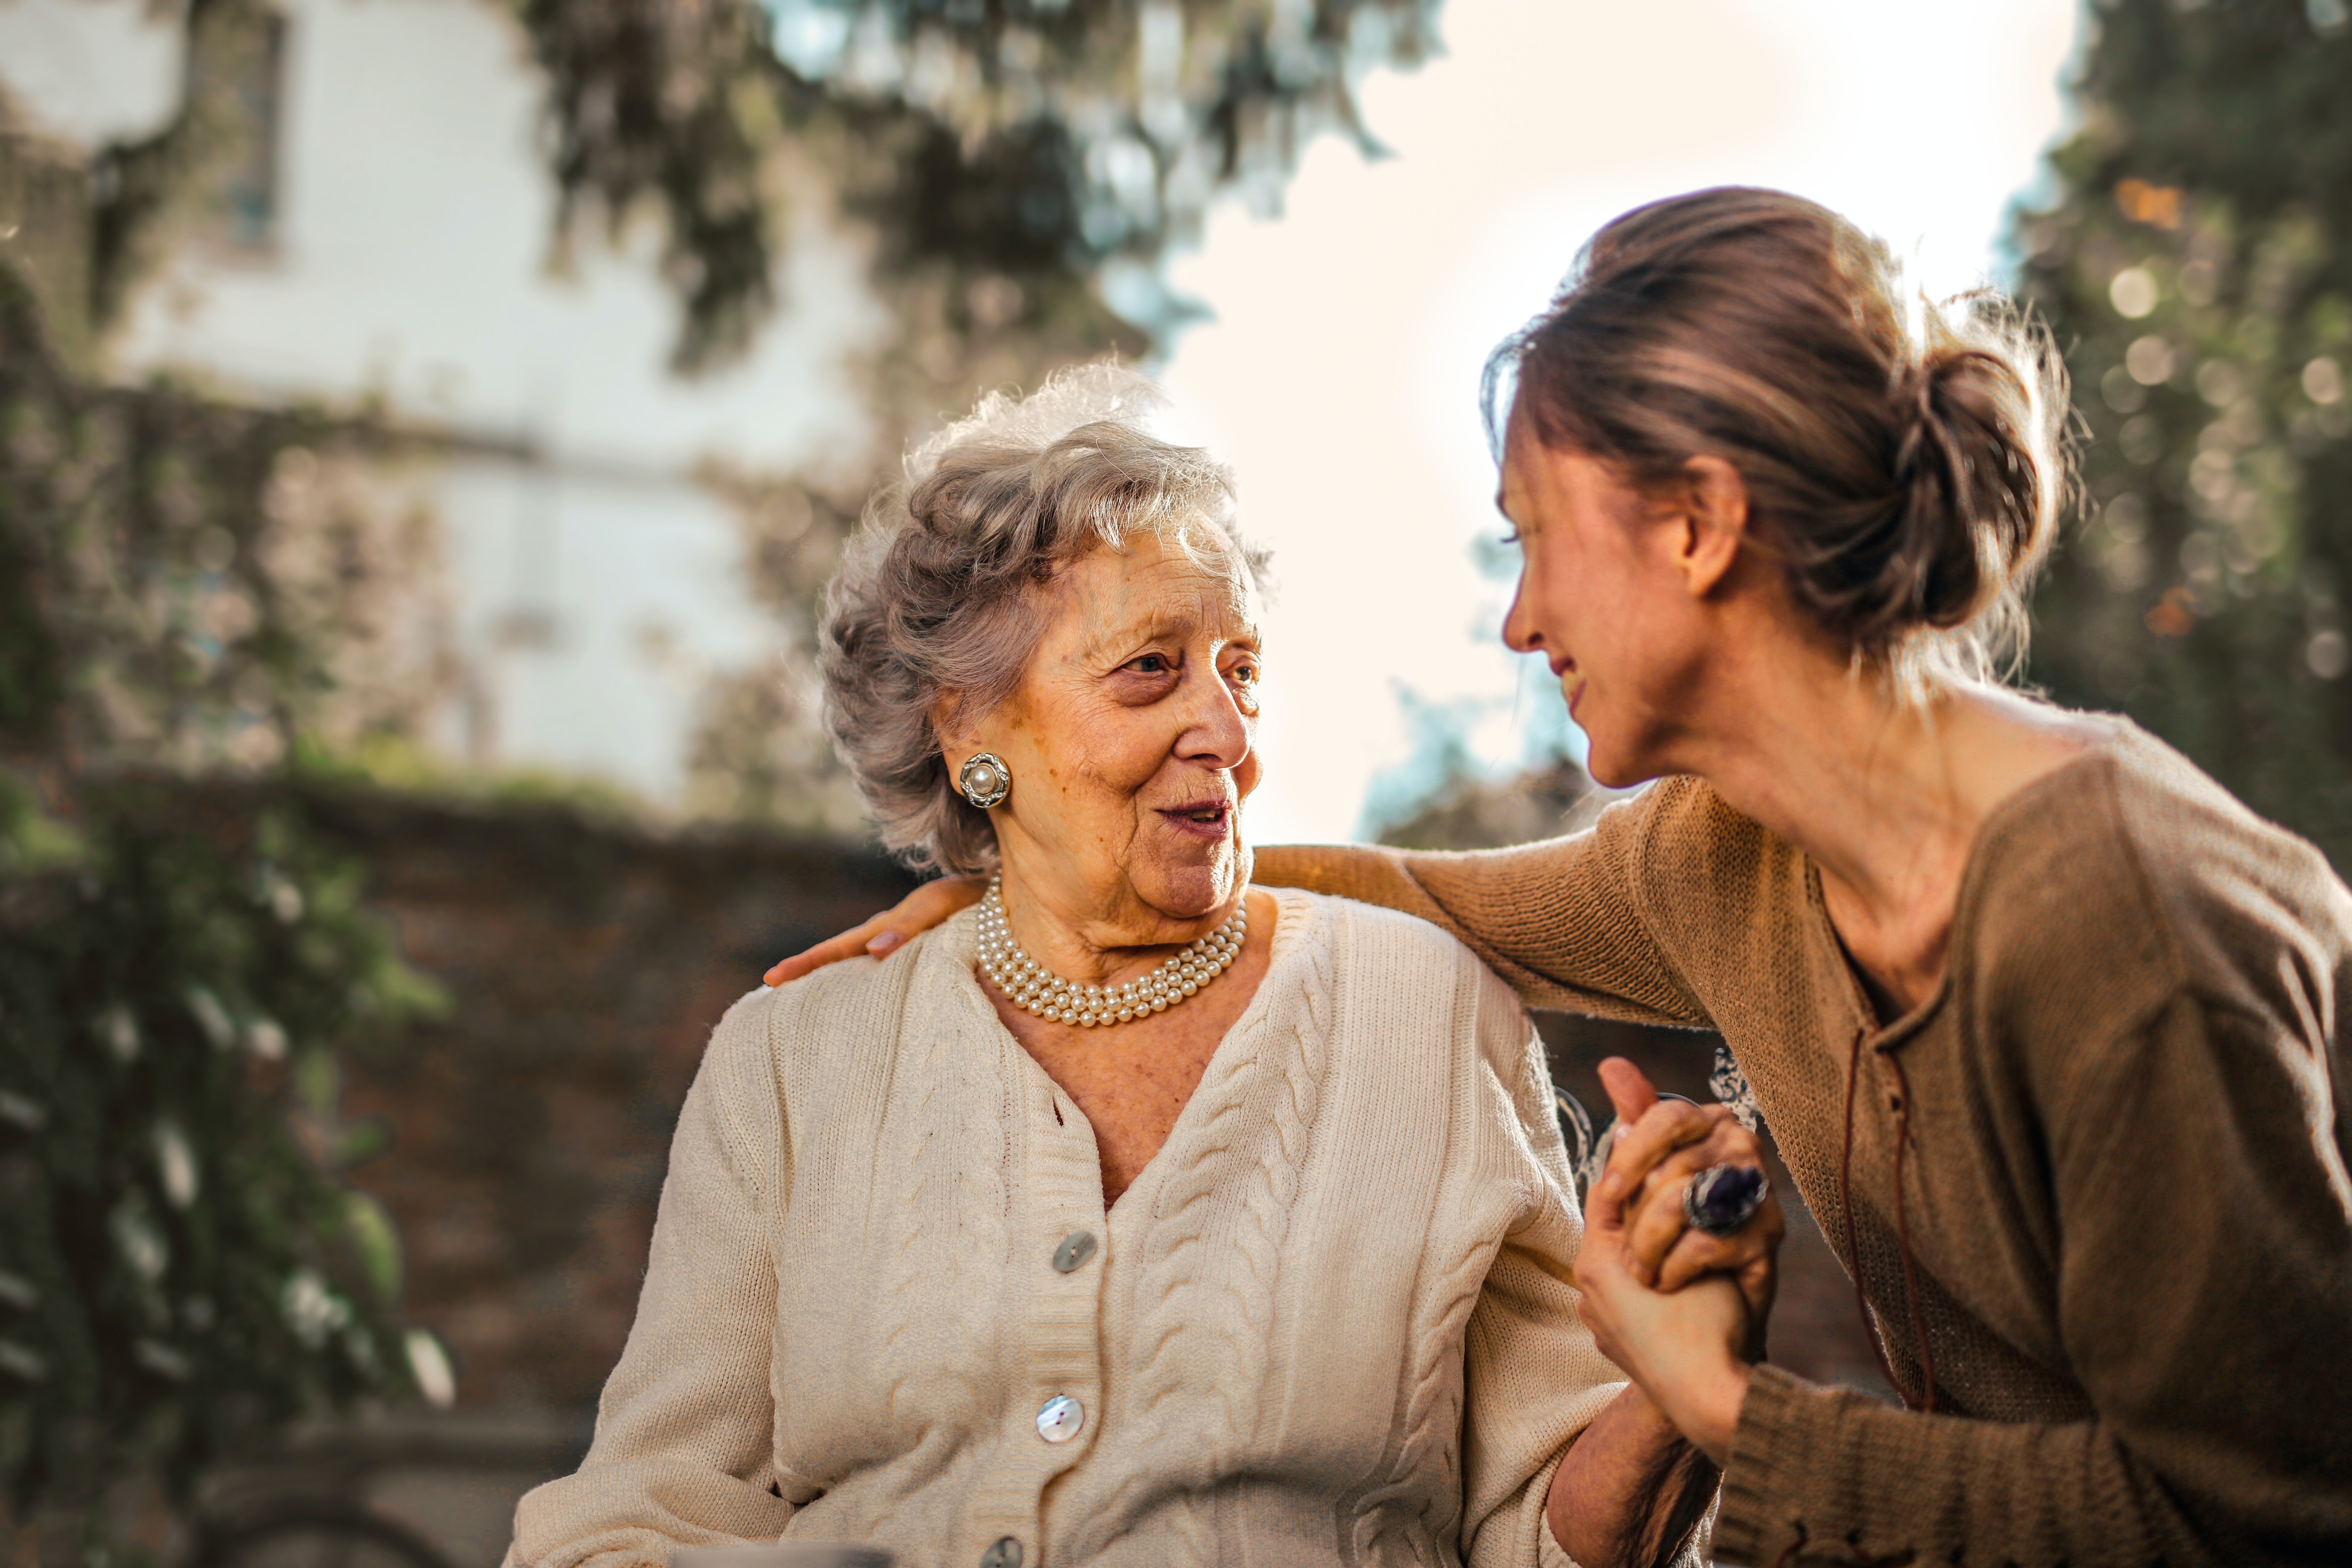 Person shares their shopping experience with their grandma | Photo: Pexels